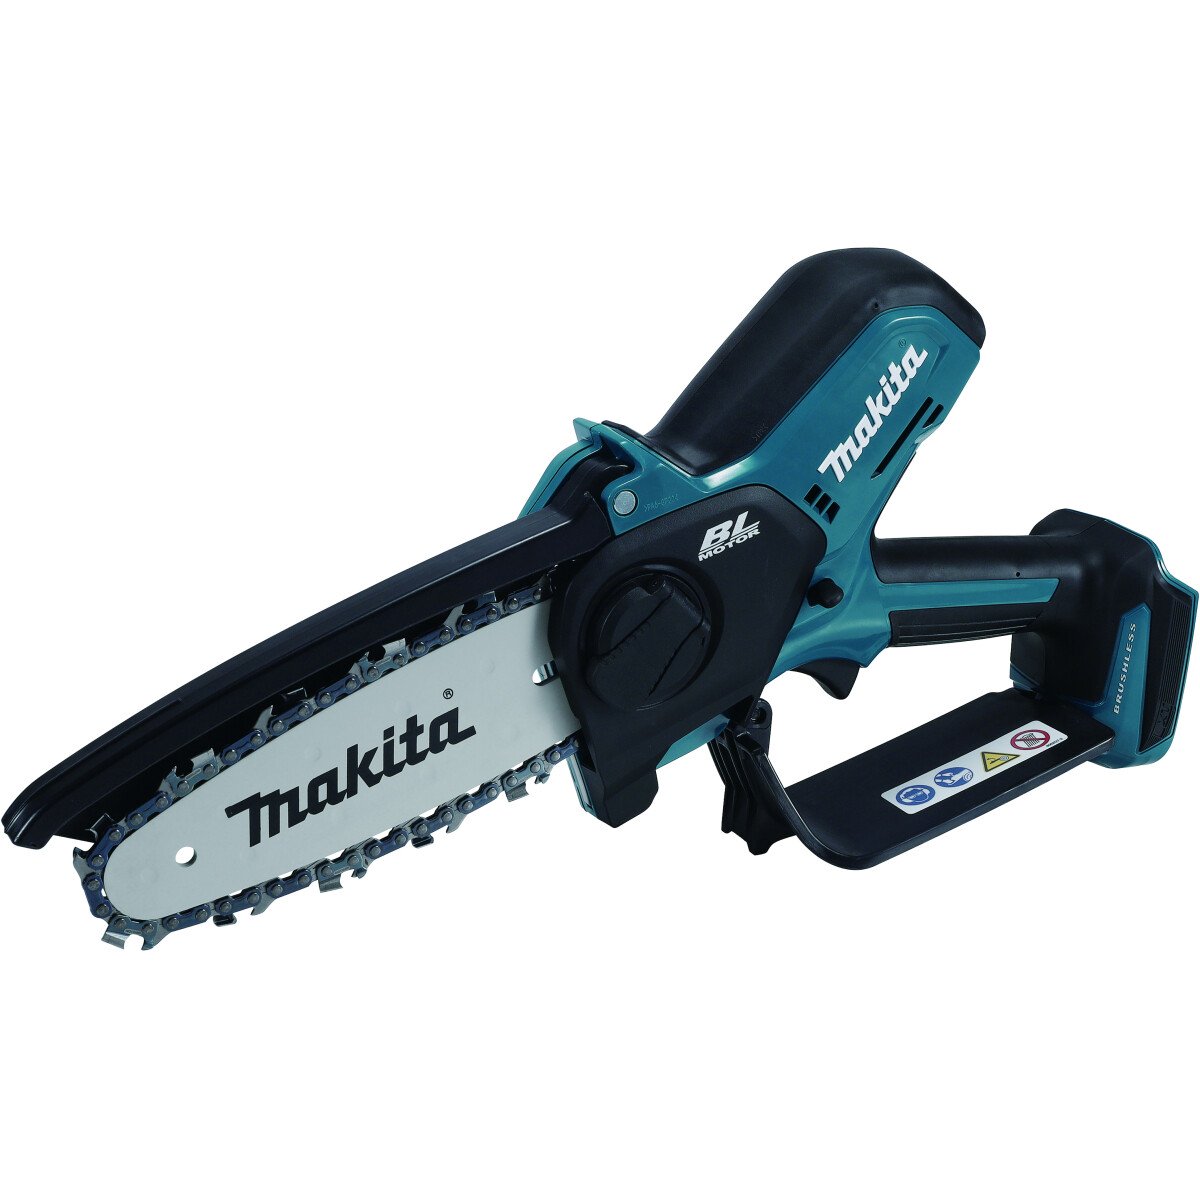 Makita DUC150Z Body Only 18v LXT  Brushless Pruning Saw